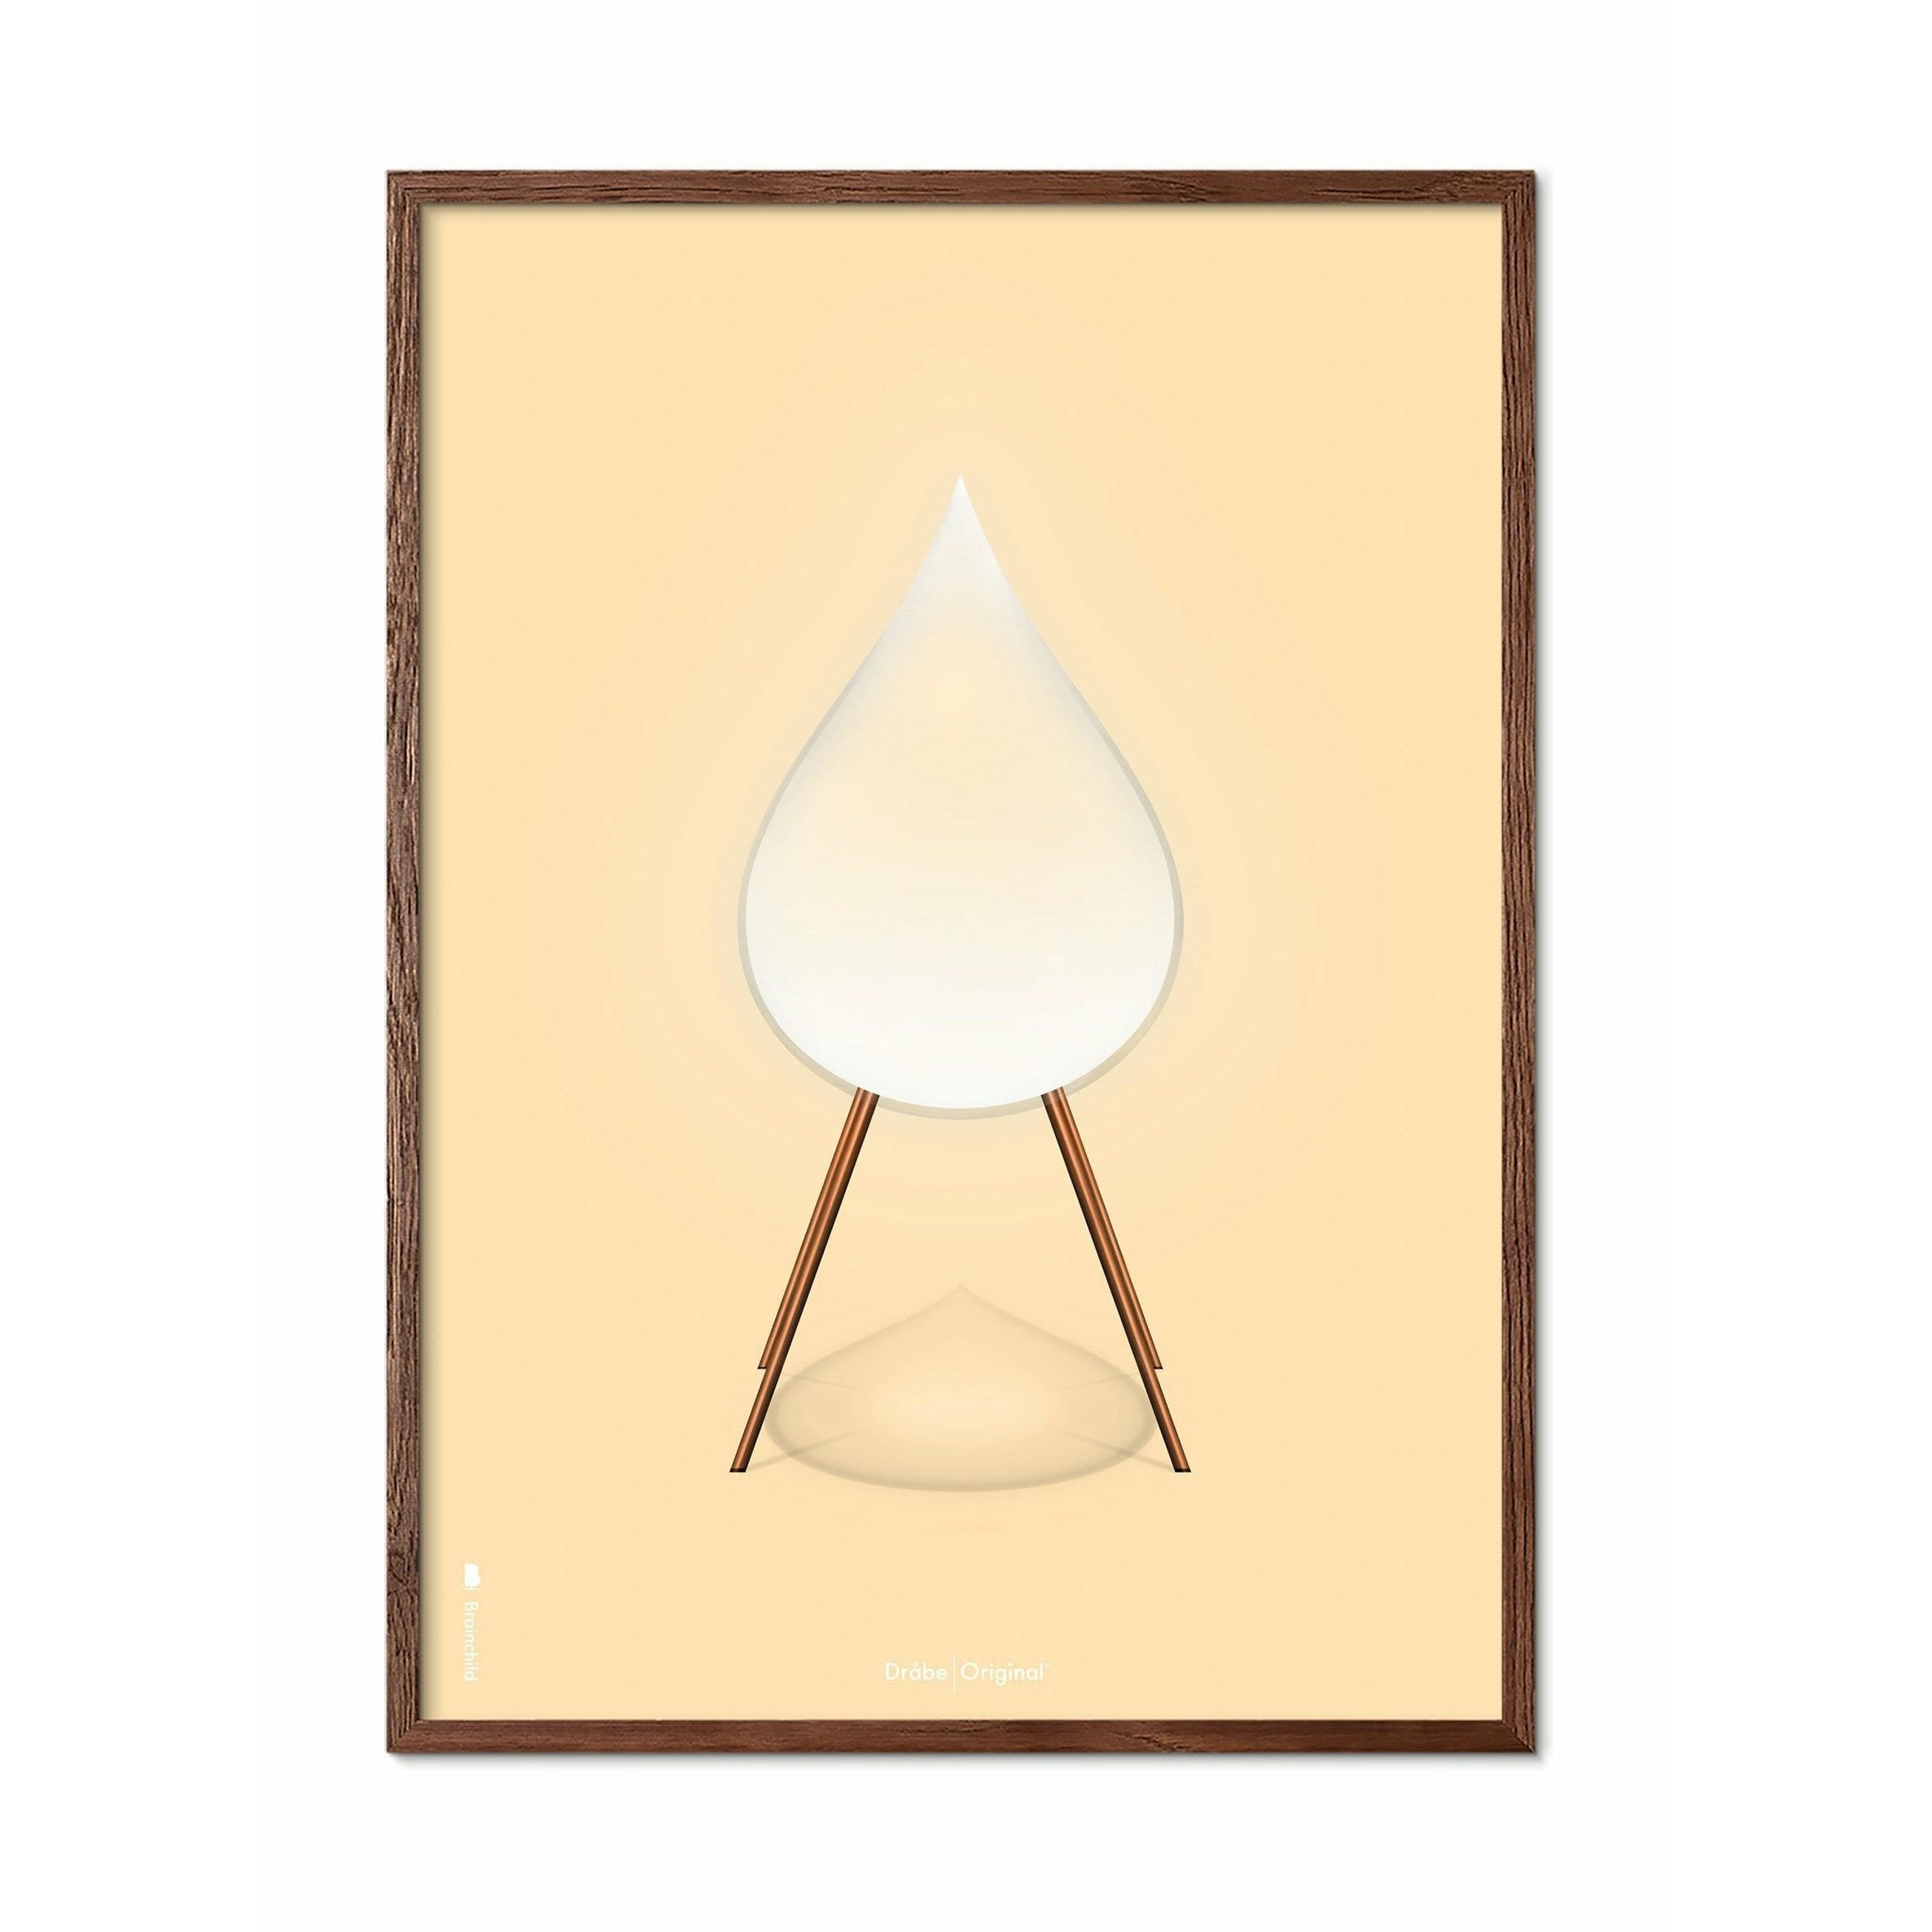 Brainchild Drop Classic Poster, Frame Made Of Dark Wood 30x40 Cm, Sand Colored Background